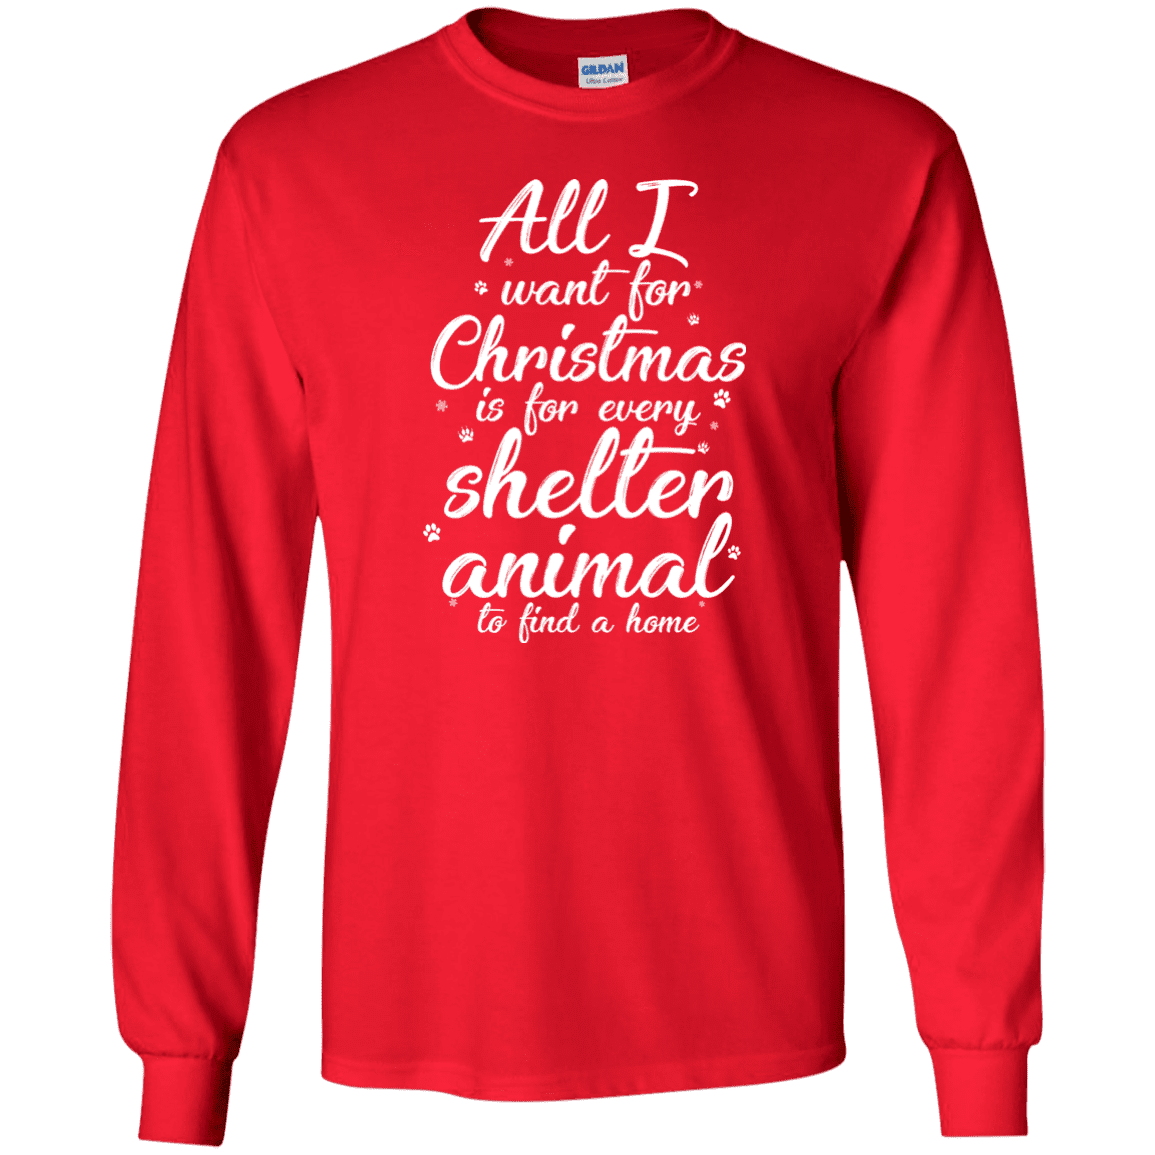 All I Want For Christmas - Long Sleeve T Shirt.